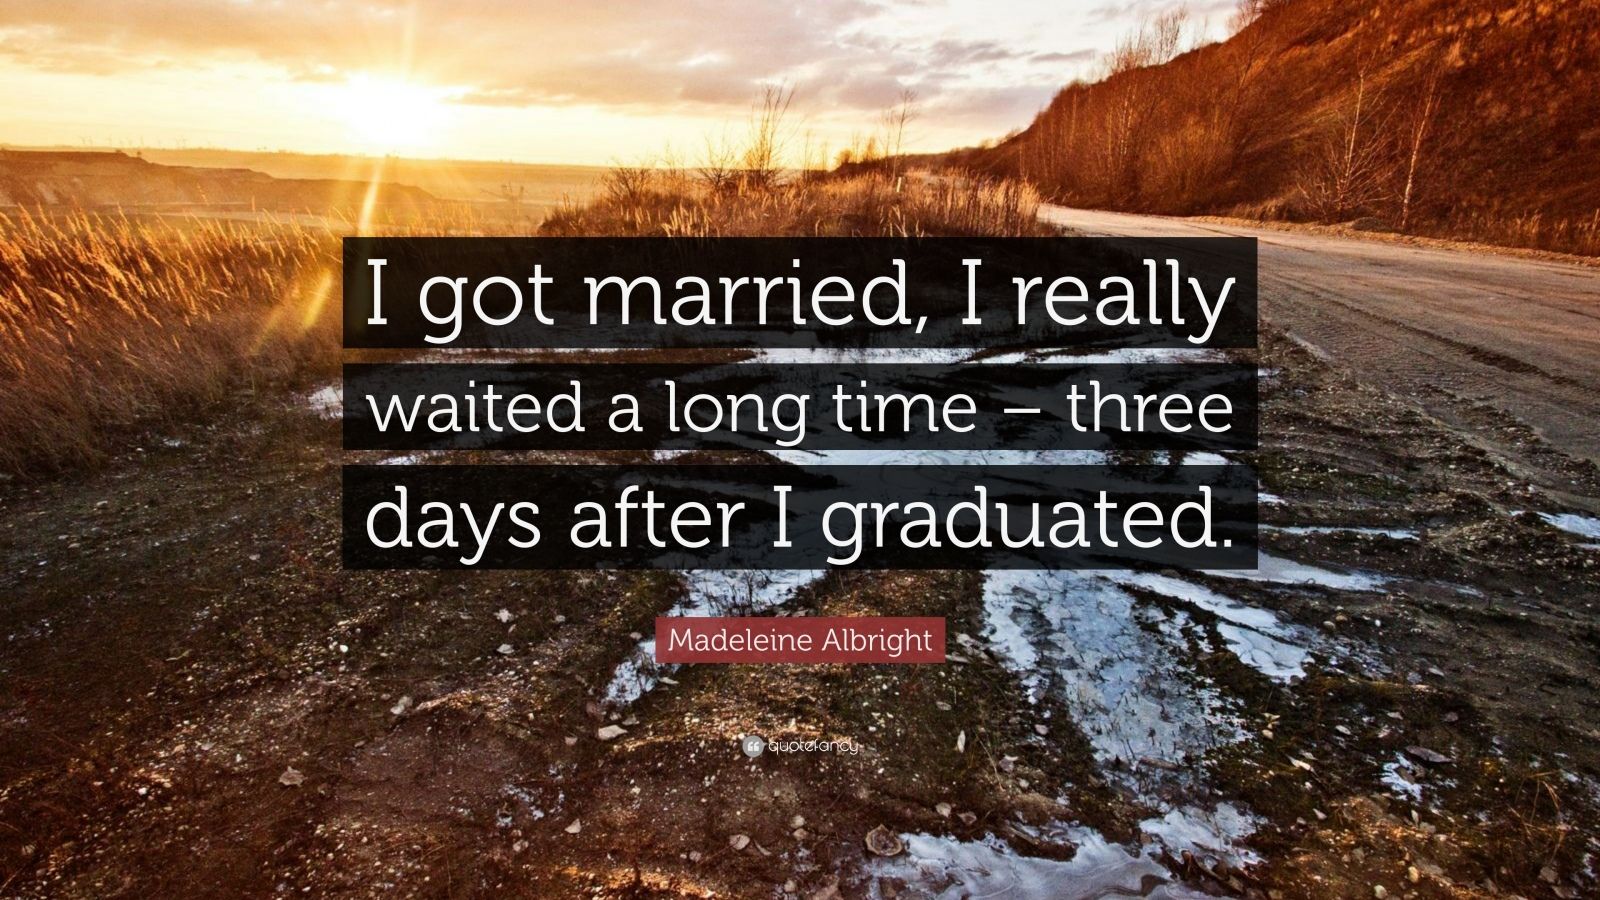 Madeleine Albright Quote “i Got Married I Really Waited A Long Time Three Days After I